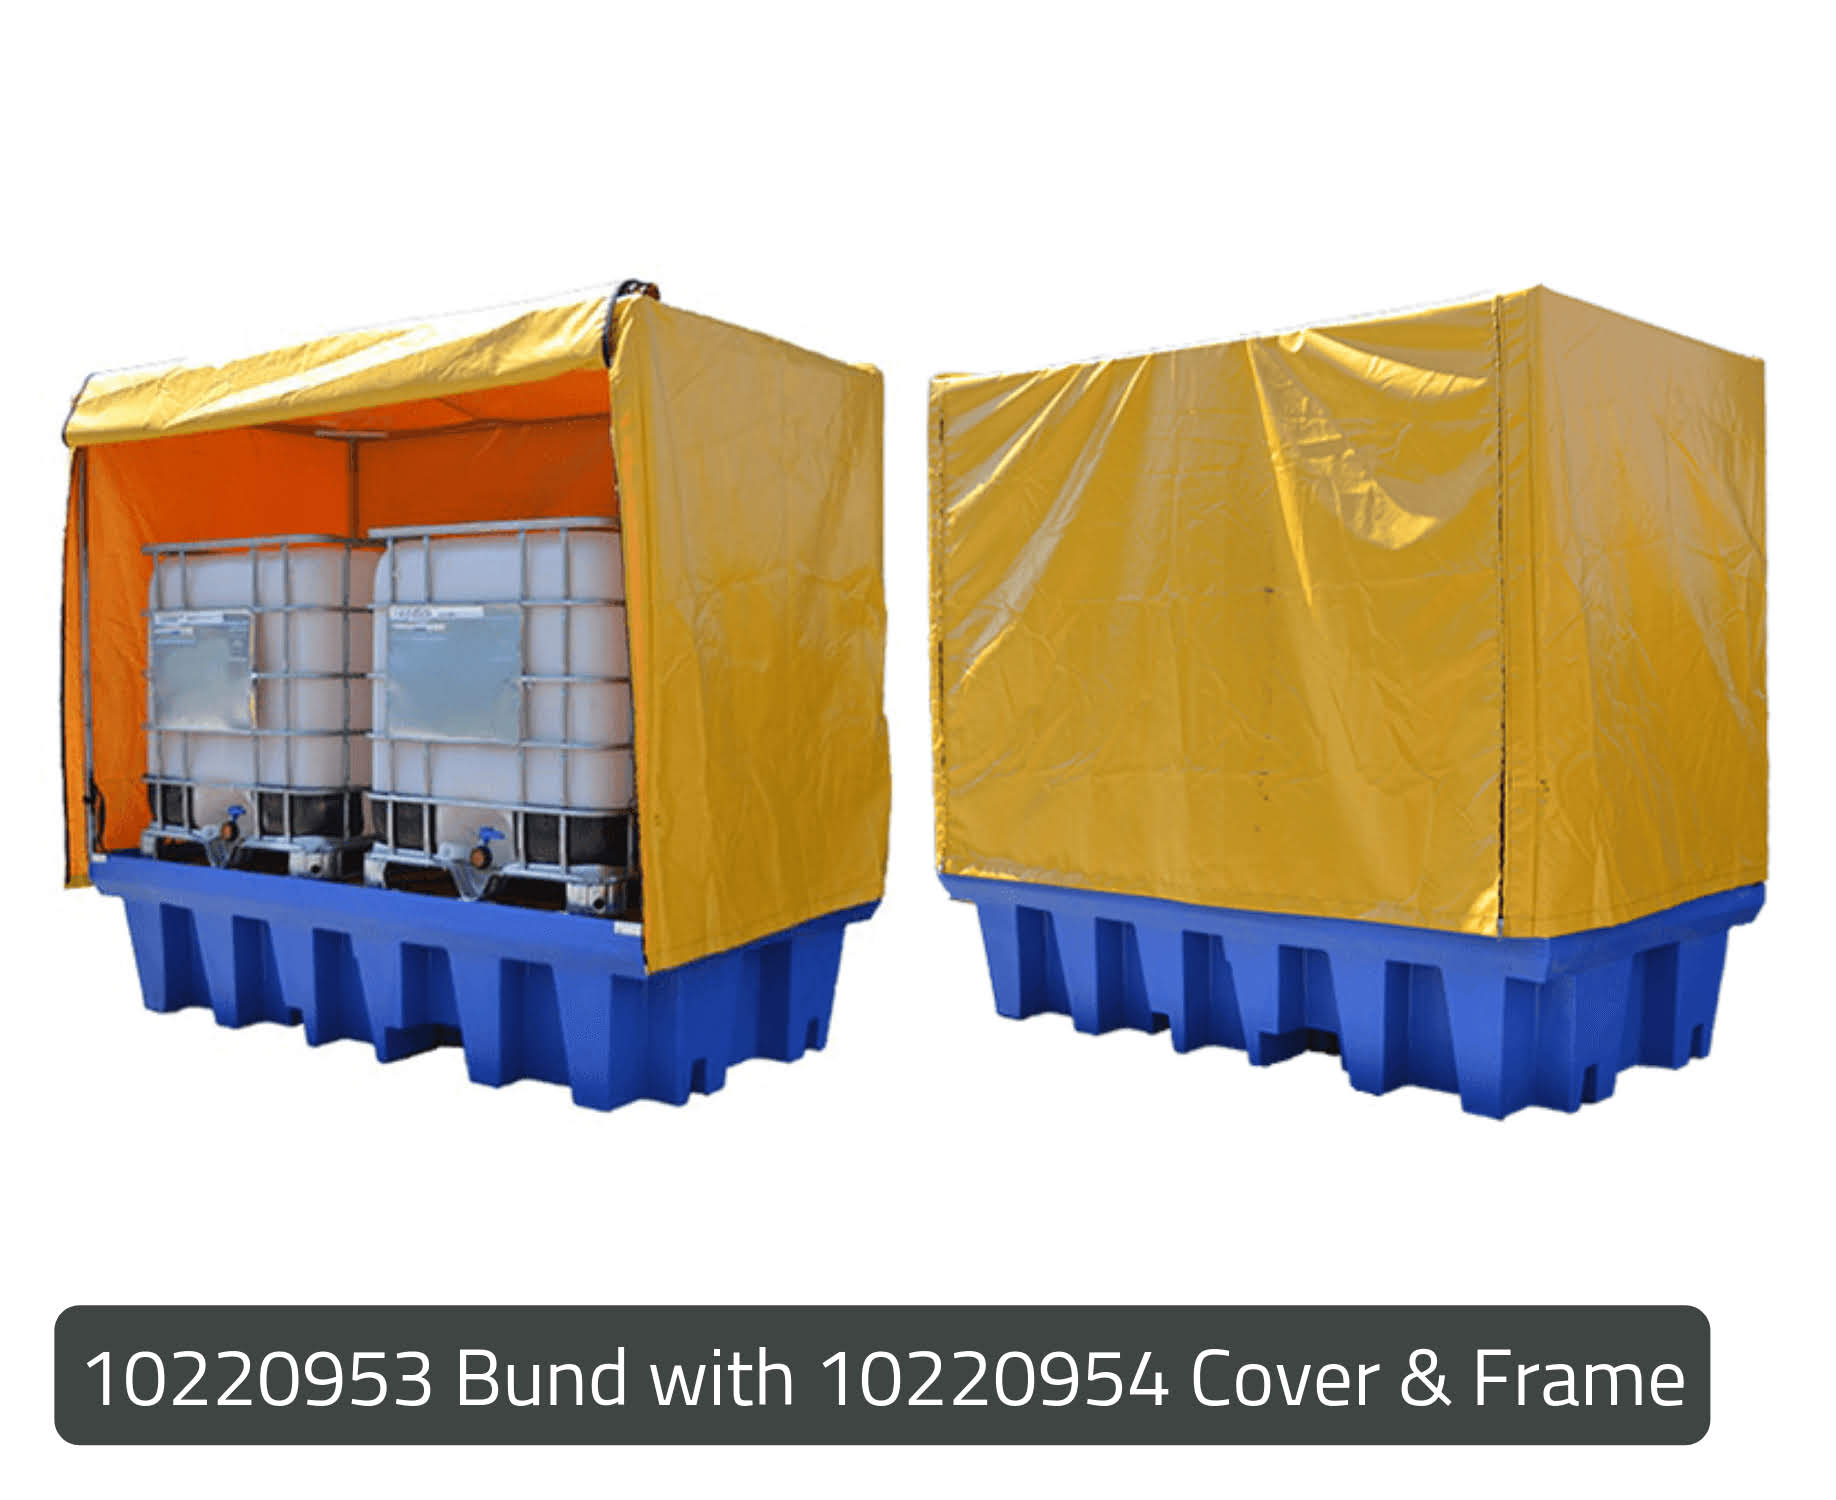 PVC Bund Covers with Steel Frame